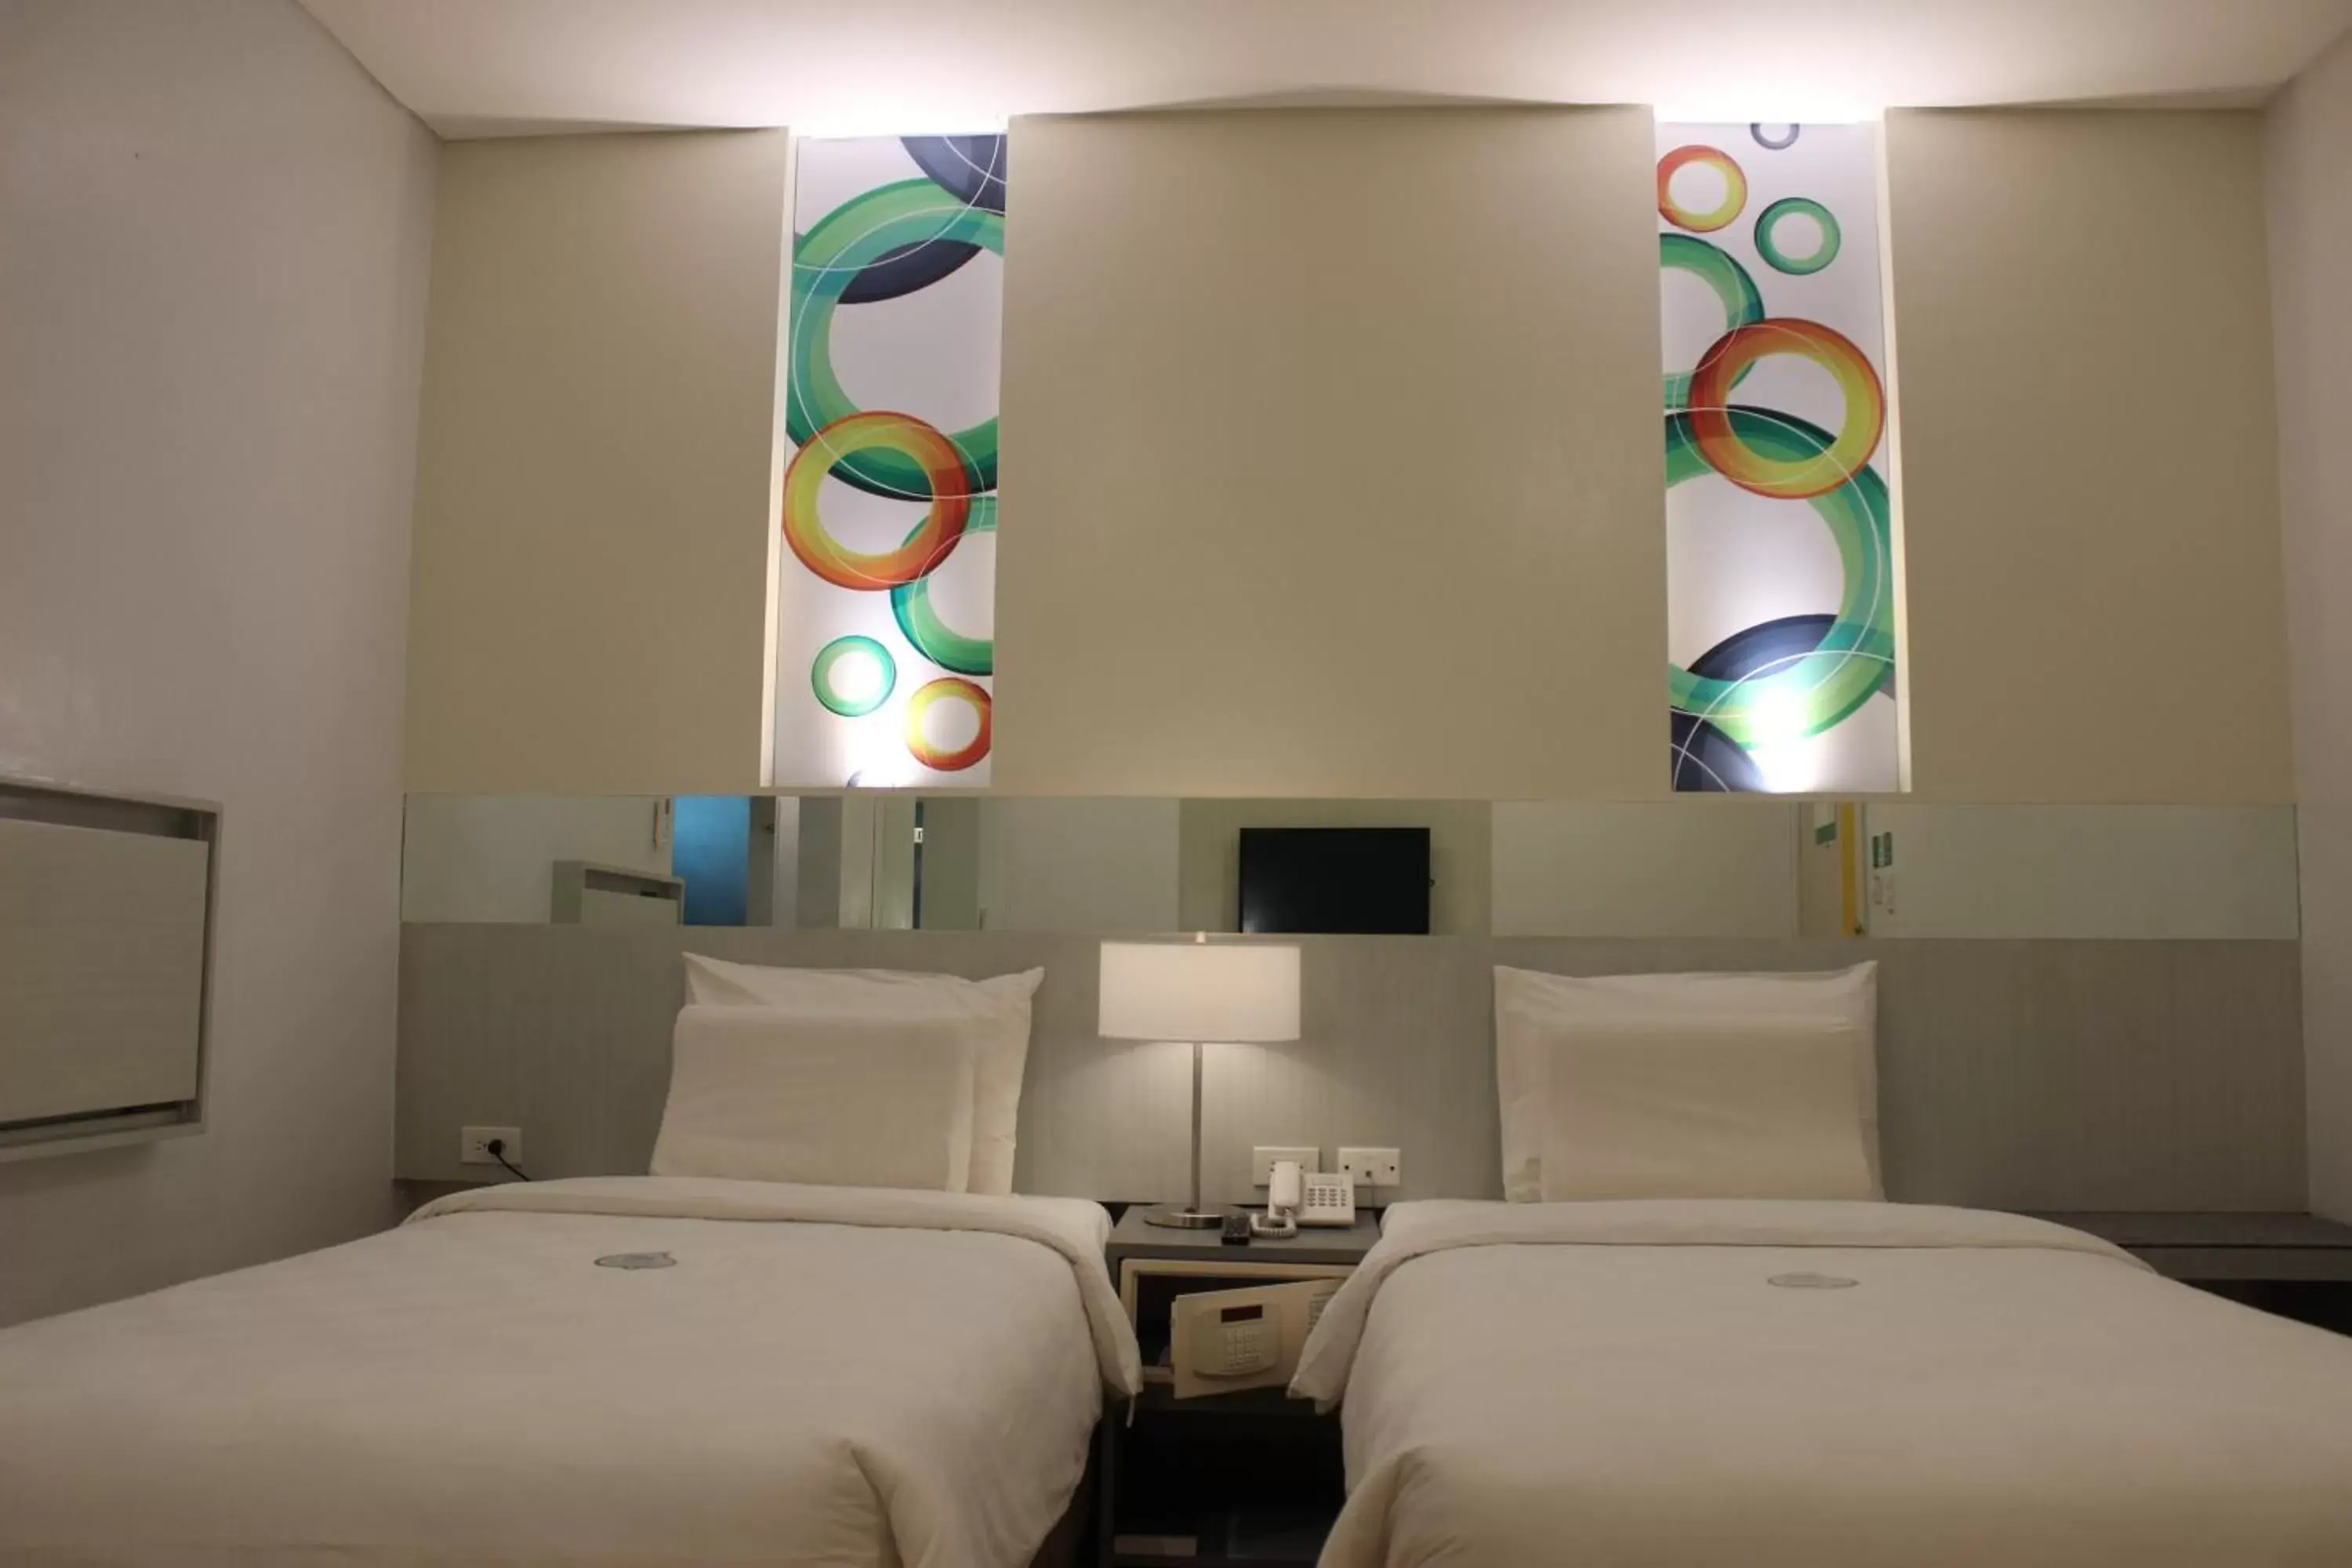 Bed, Room Photo in Go Hotels Butuan